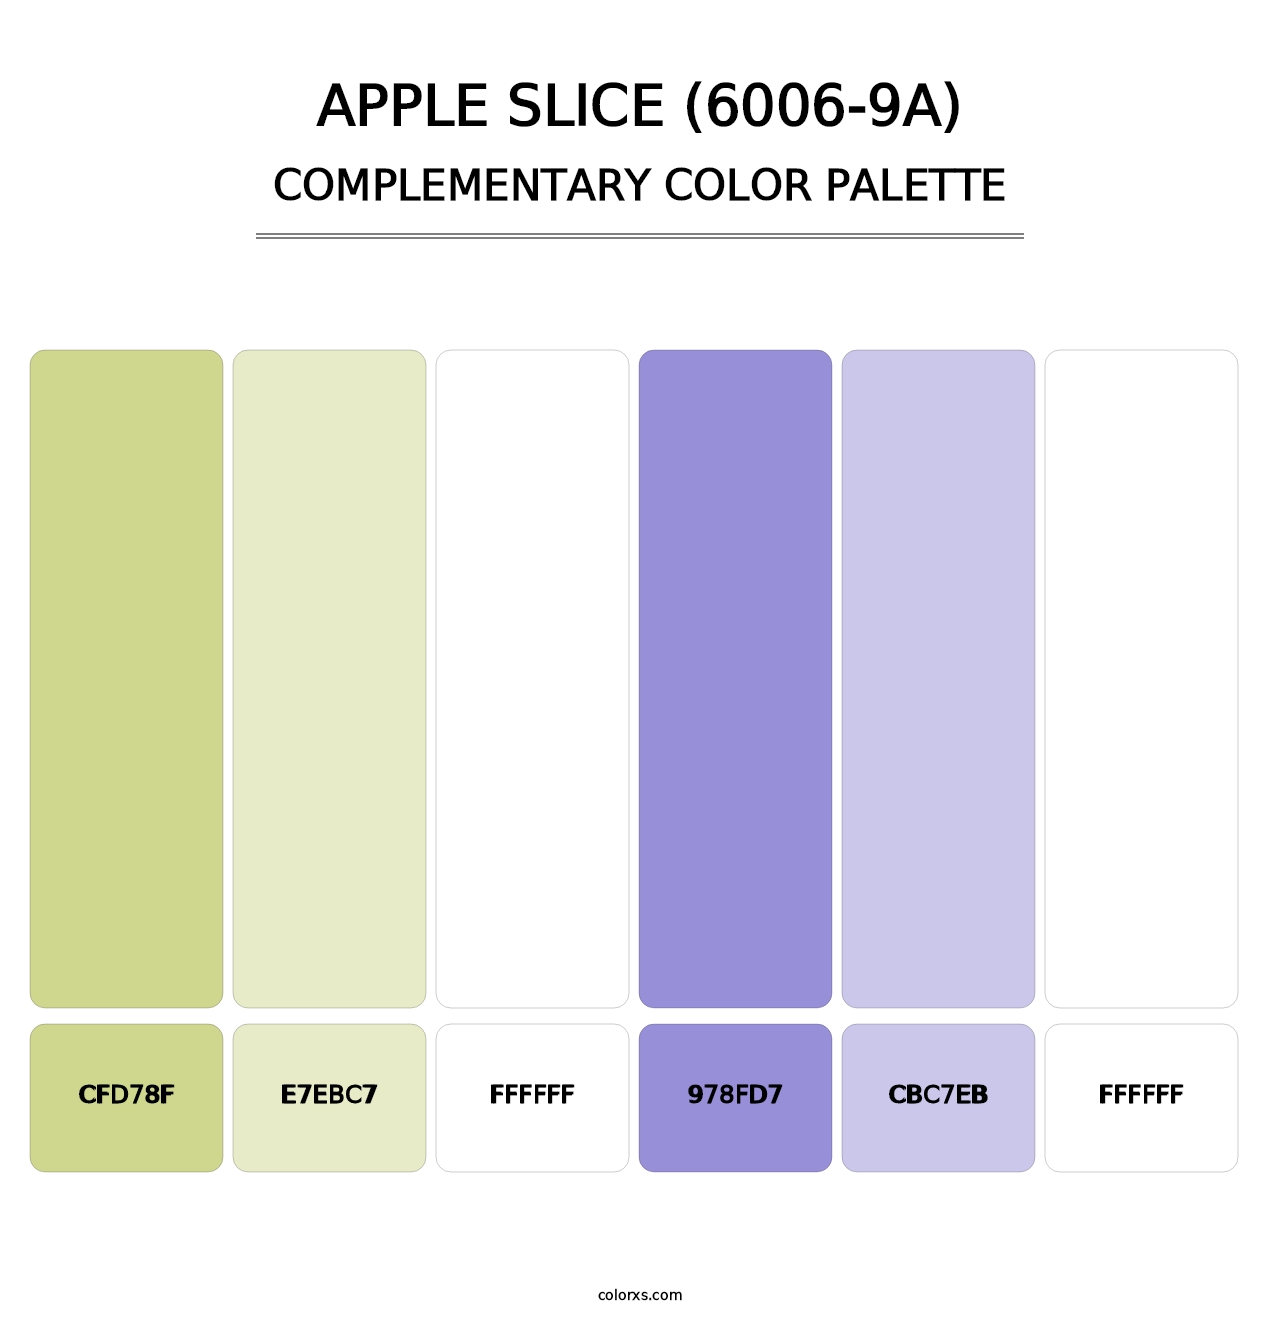 Apple Slice (6006-9A) - Complementary Color Palette